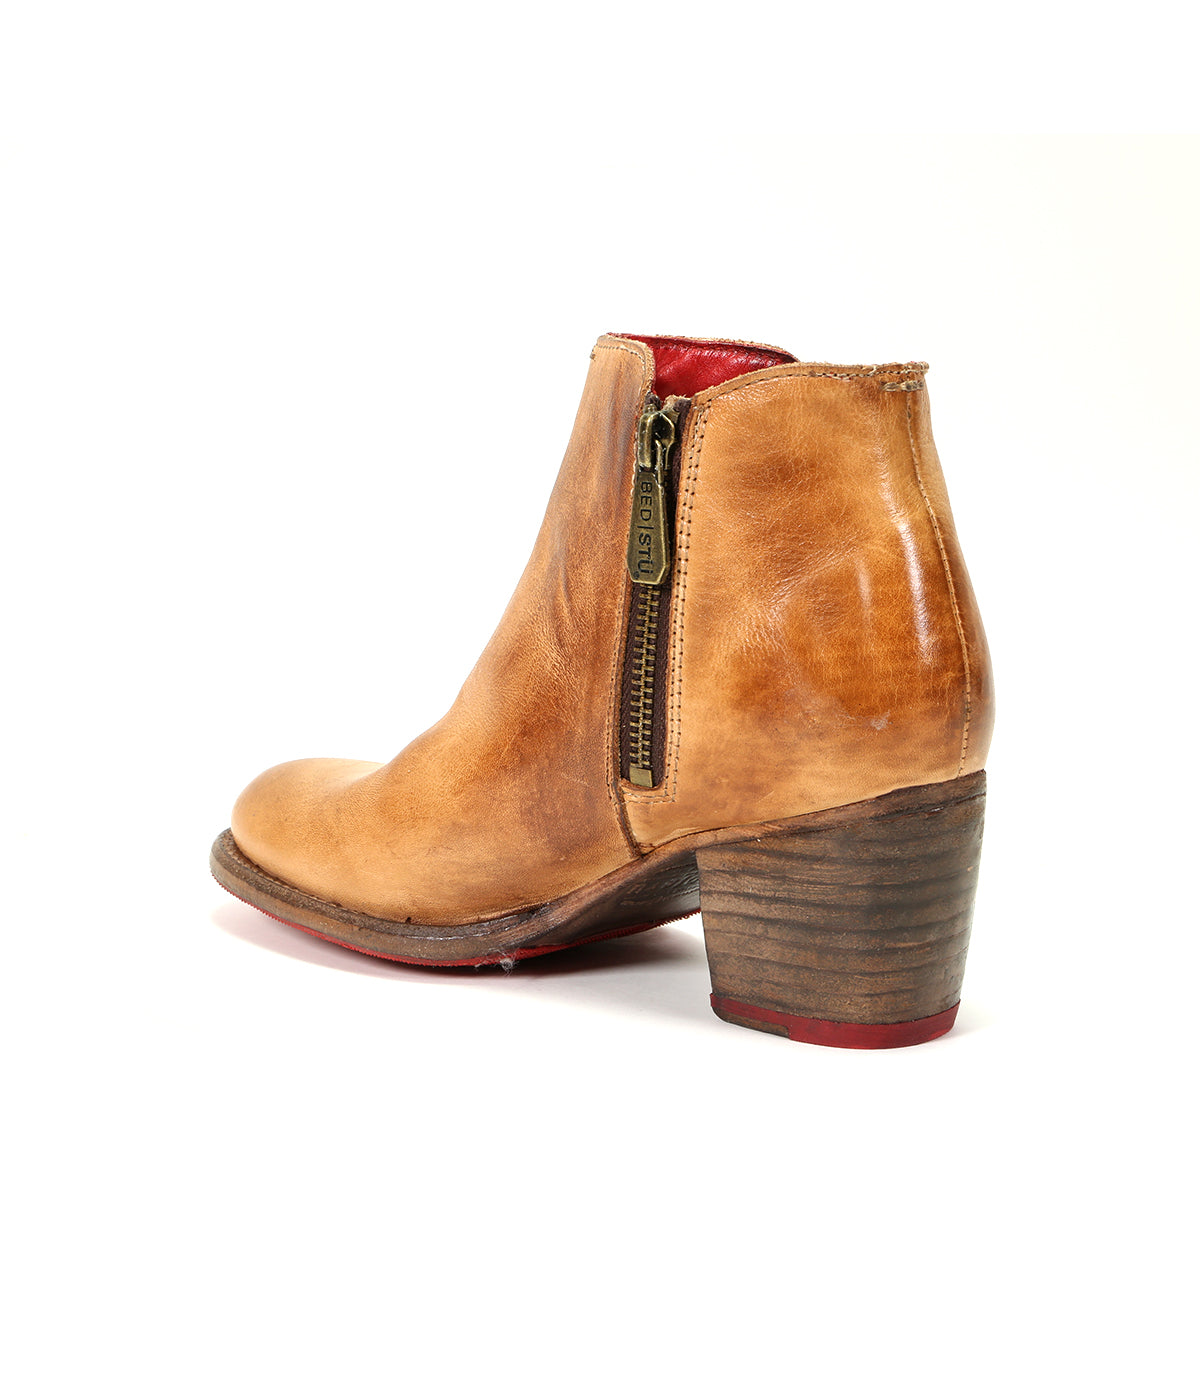 A durable women's ankle boot in tan leather, handmade with exquisite craftsmanship, called Yell by Bed Stu.